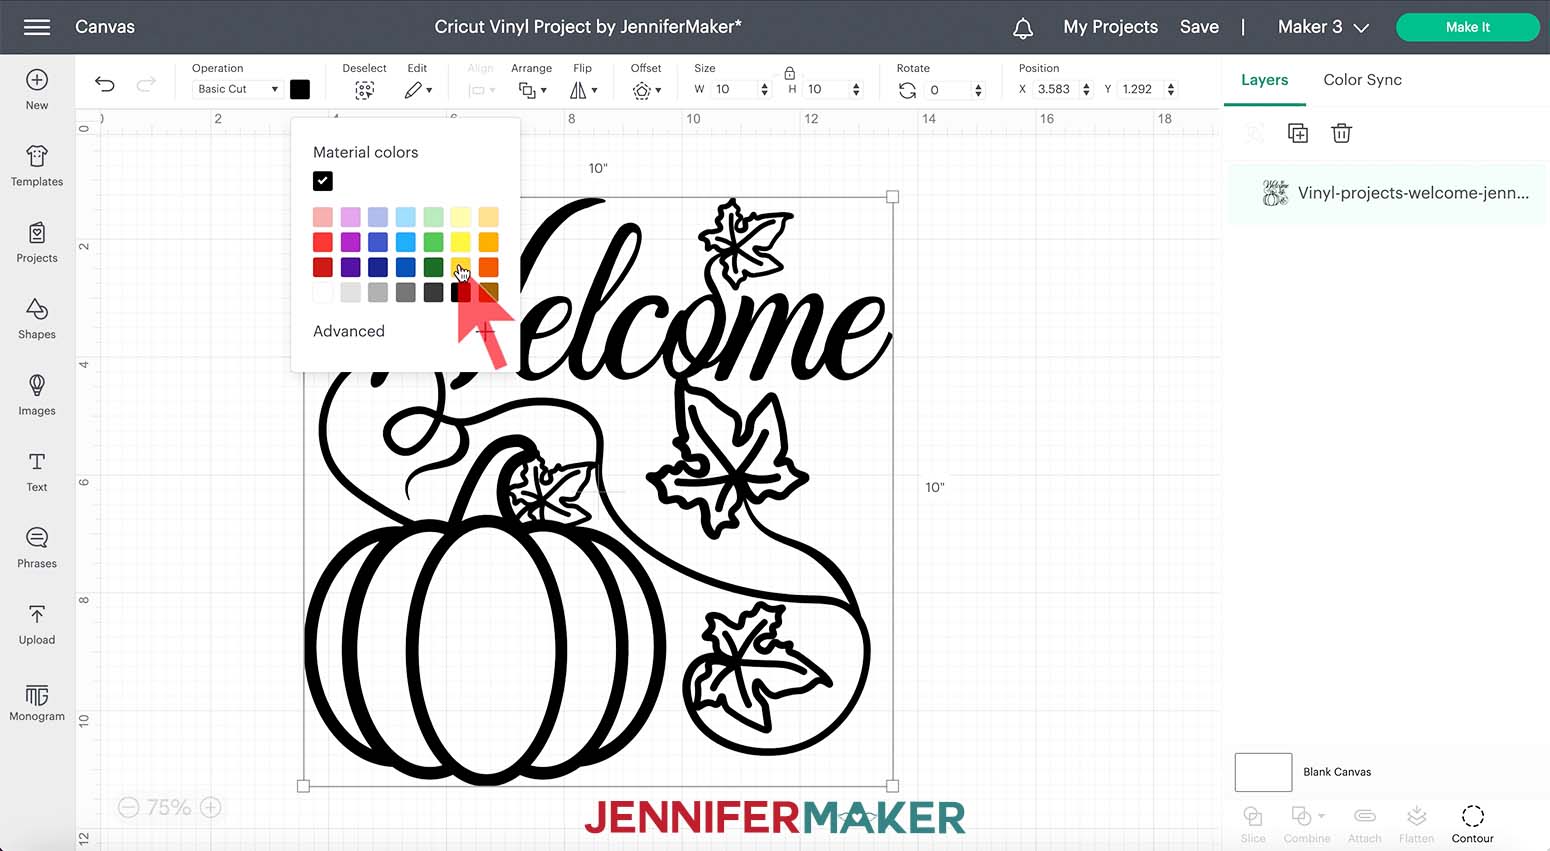 Screenshot of Cricut Design Space Canvas showing to select the color menu to change the color of the selected image.